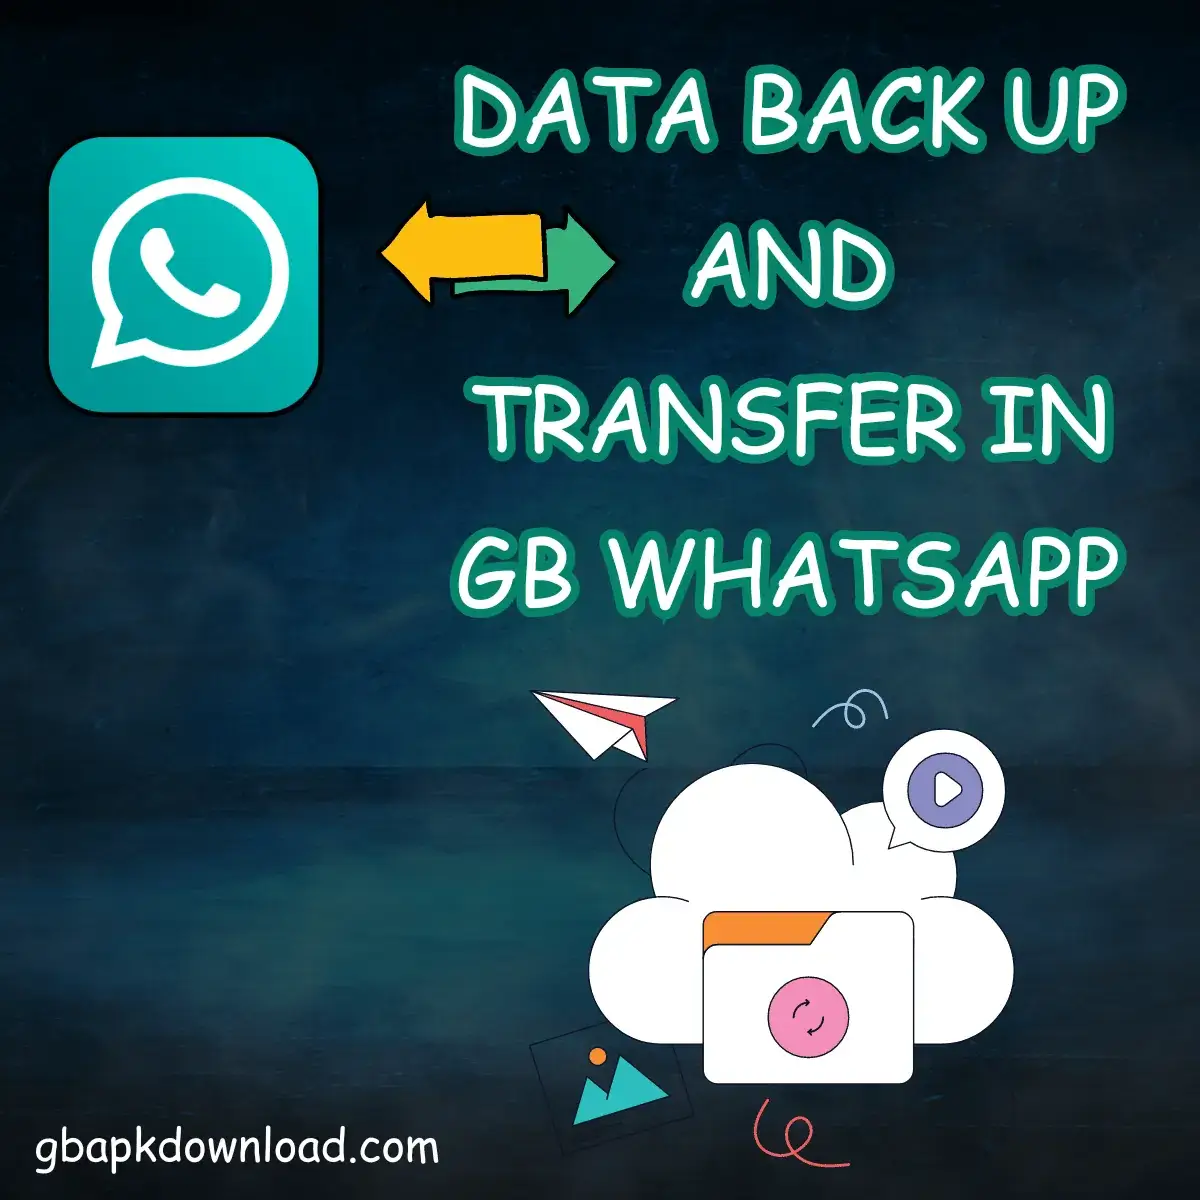 Data Back Up and Transfer in GB WhatsApp